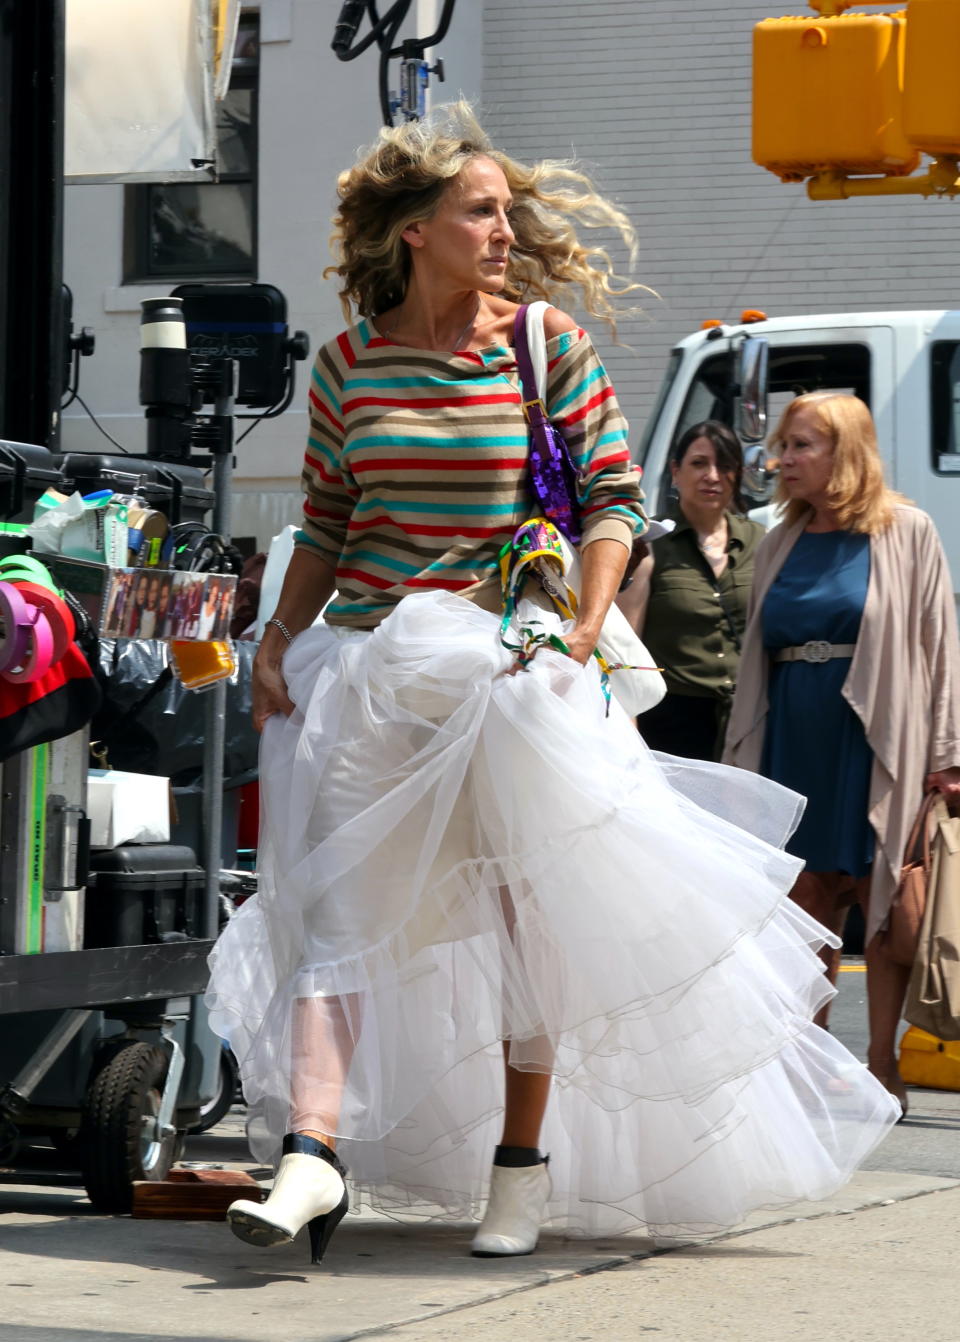 Sarah Jessica Parker is seen filming “And Just Like That…” the follow-up series to “Sex and the City” in New York City. - Credit: Jose Perez/Bauergriffin.com / MEGA